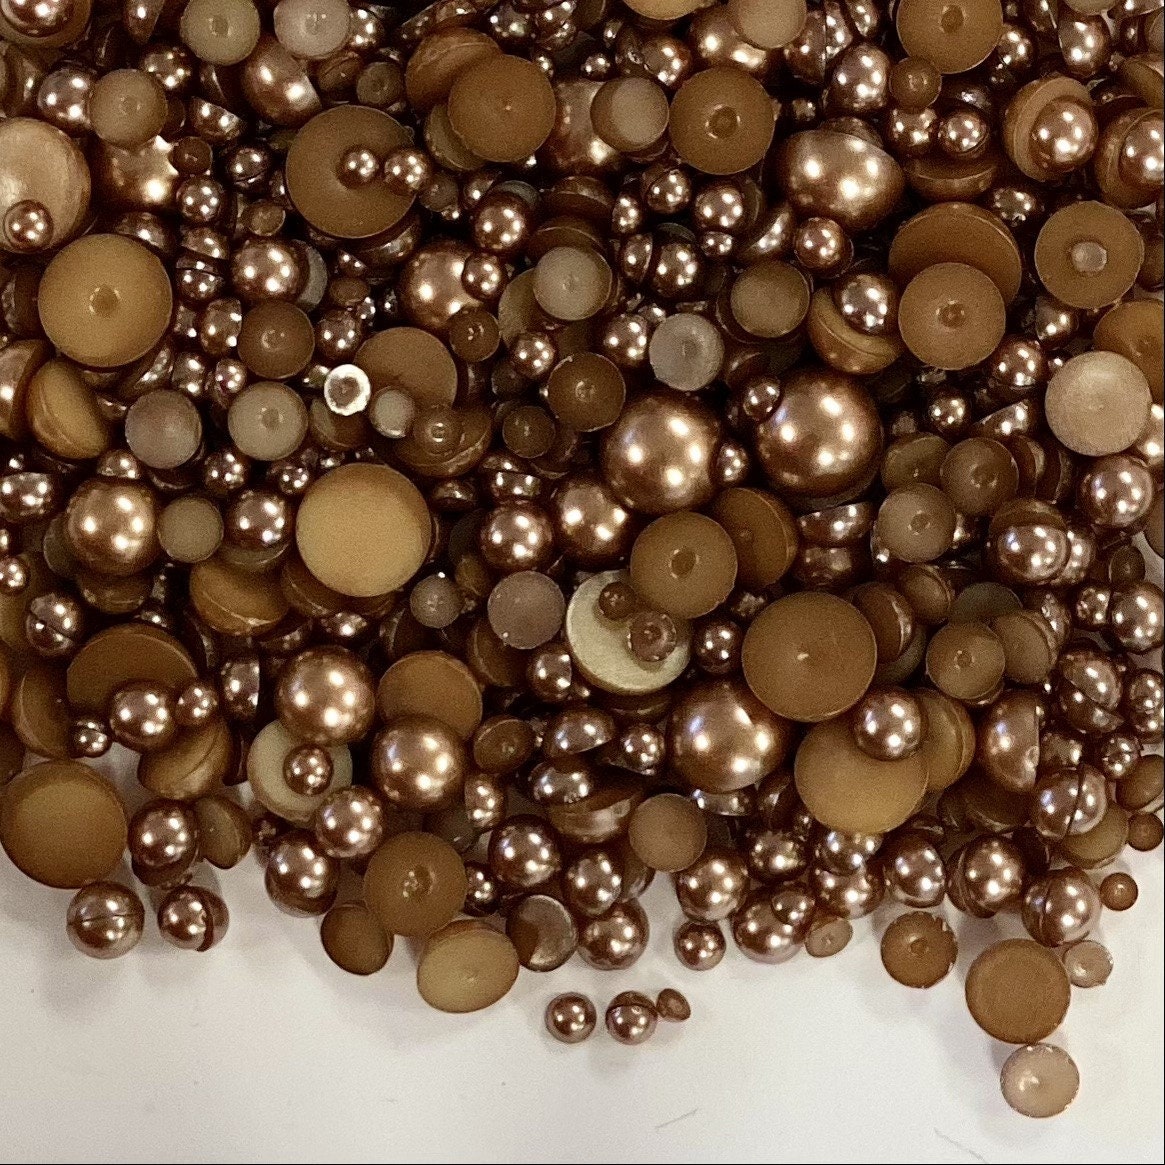 Bling World 800 Pcs Flat Back Pearls, Mixed Sizes 3-14mm Half Round Pearl Beads, 7 Size Black Flatback Half Pearls for Craft DIY Jewelry Making Nail